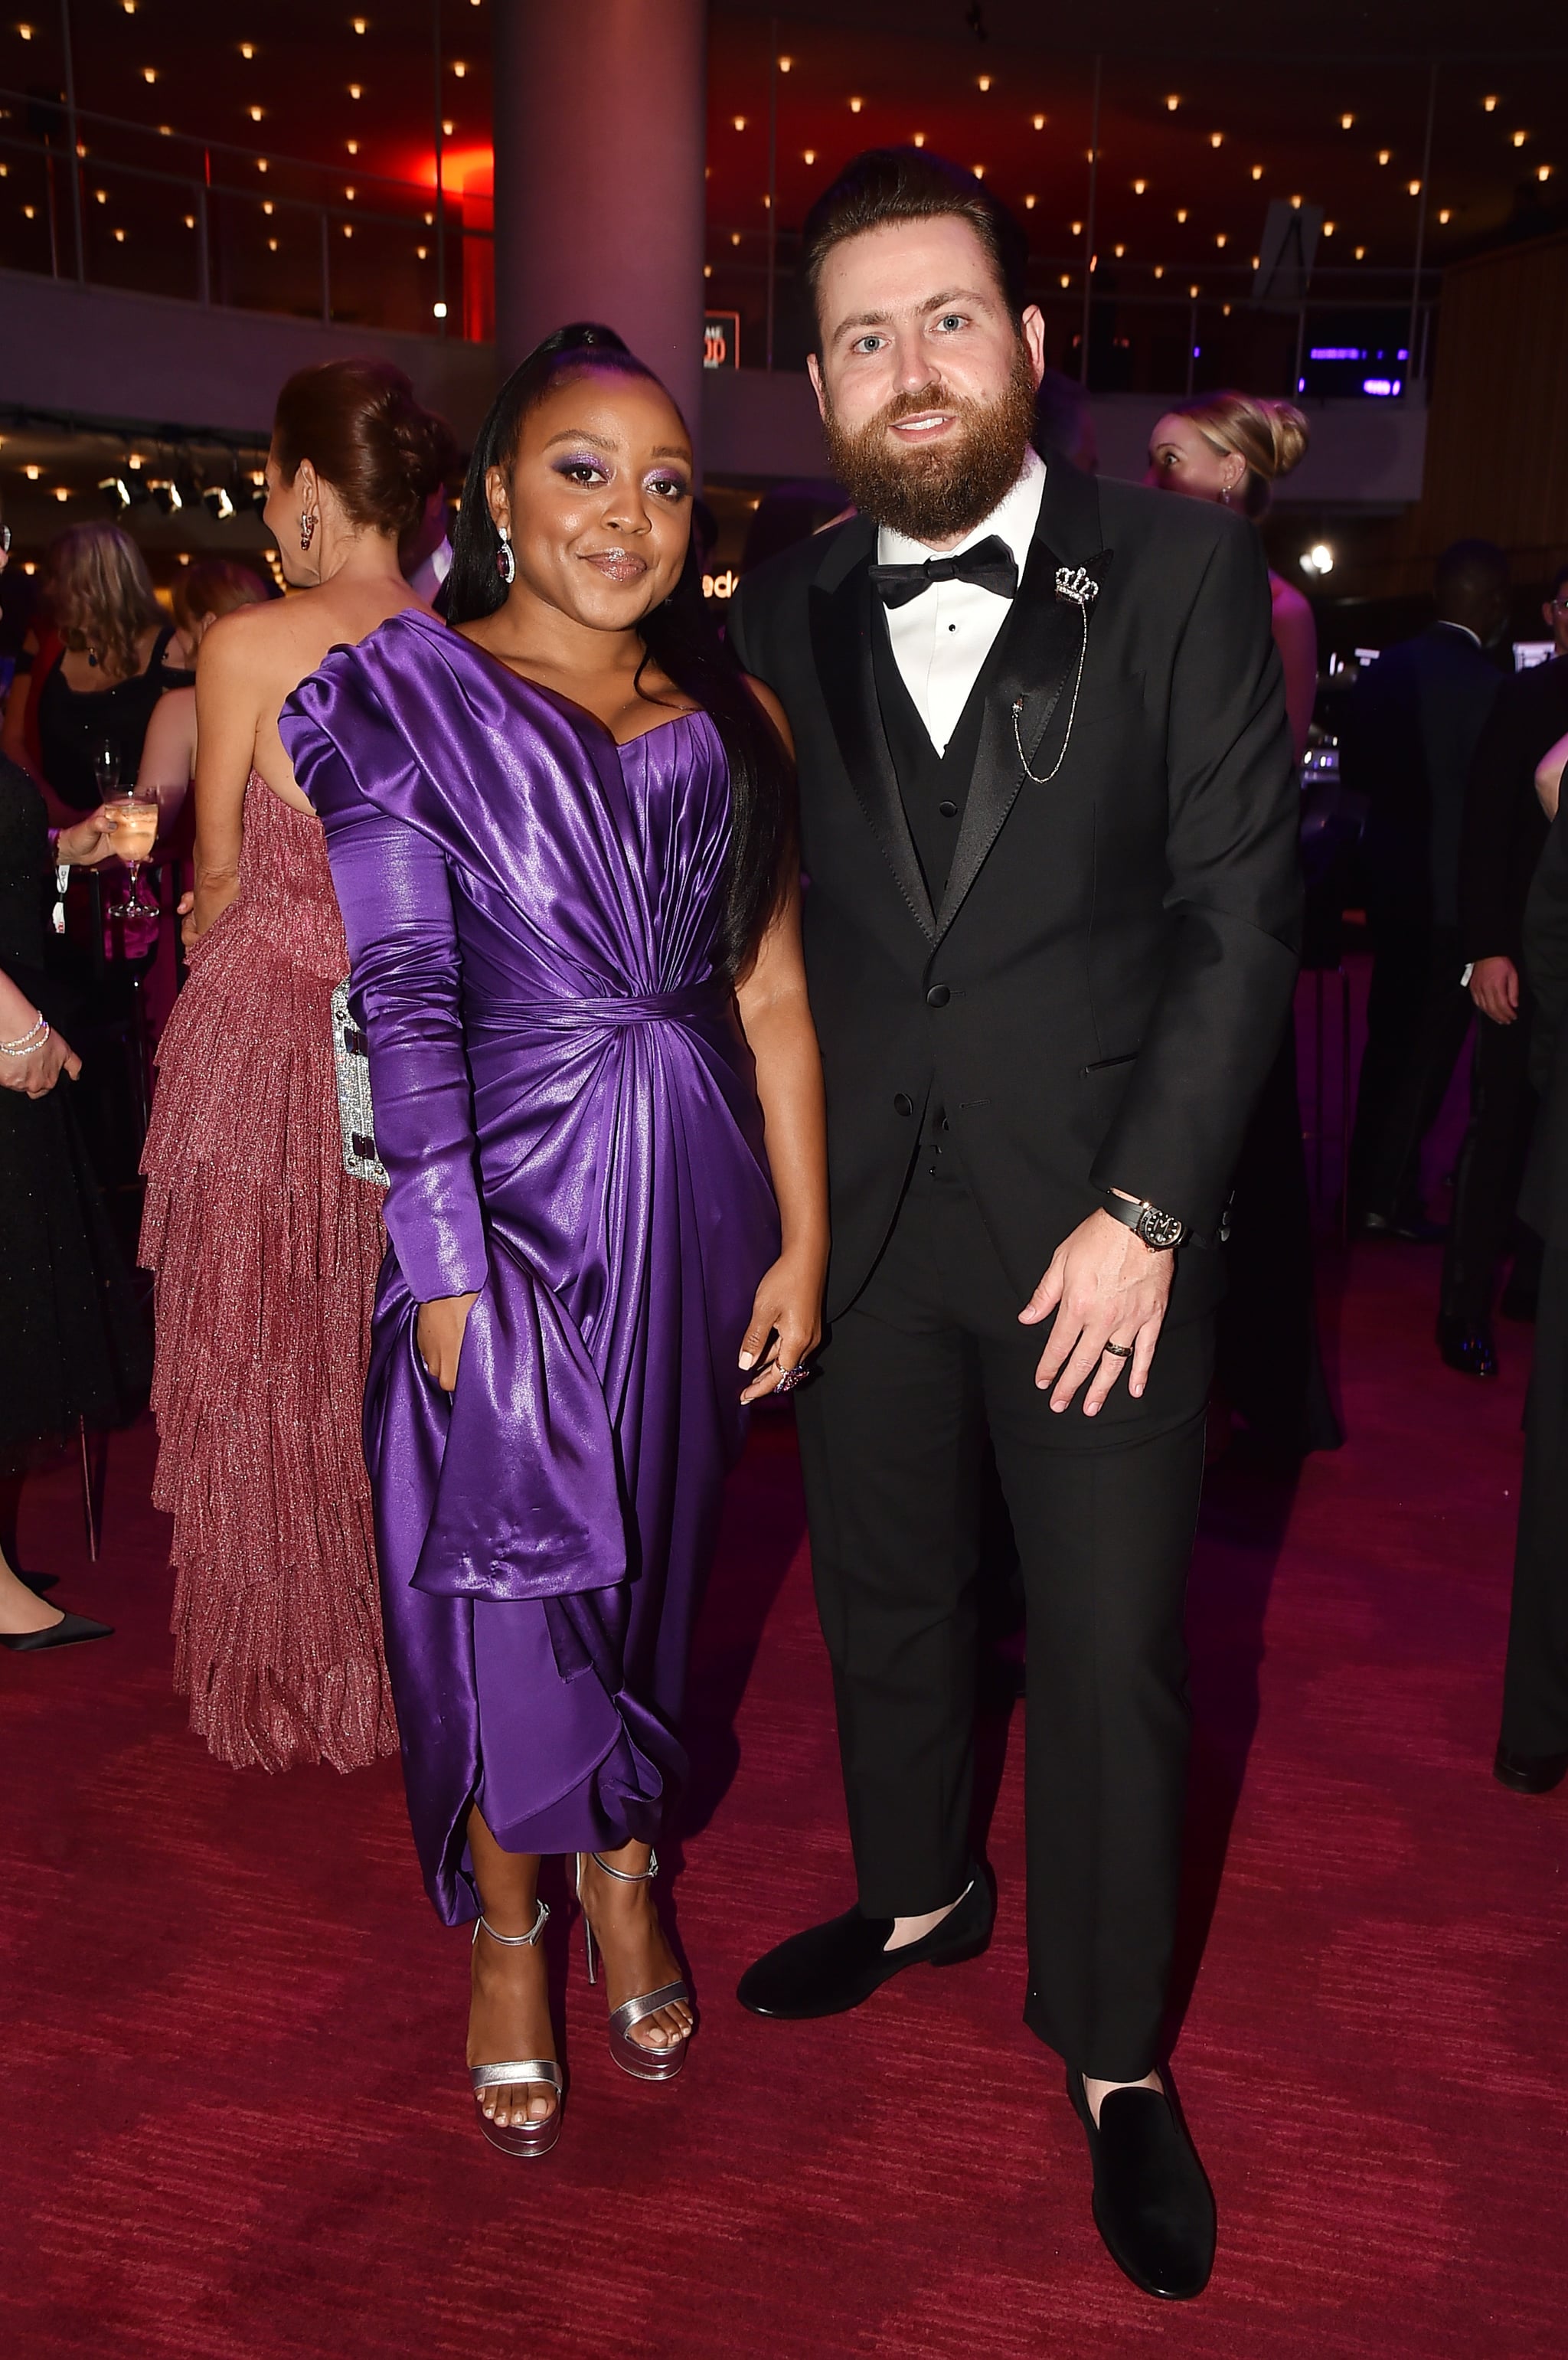 NEW YORK, NEW YORK - JUNE 08: Quinta Brunson and Kevin Jay Anik attend the 2022 TIME100 Gala at Jazz at Lincoln Center on June 08, 2022 in New York City. (Photo by Patrick McMullan/Patrick McMullan via Getty Images)